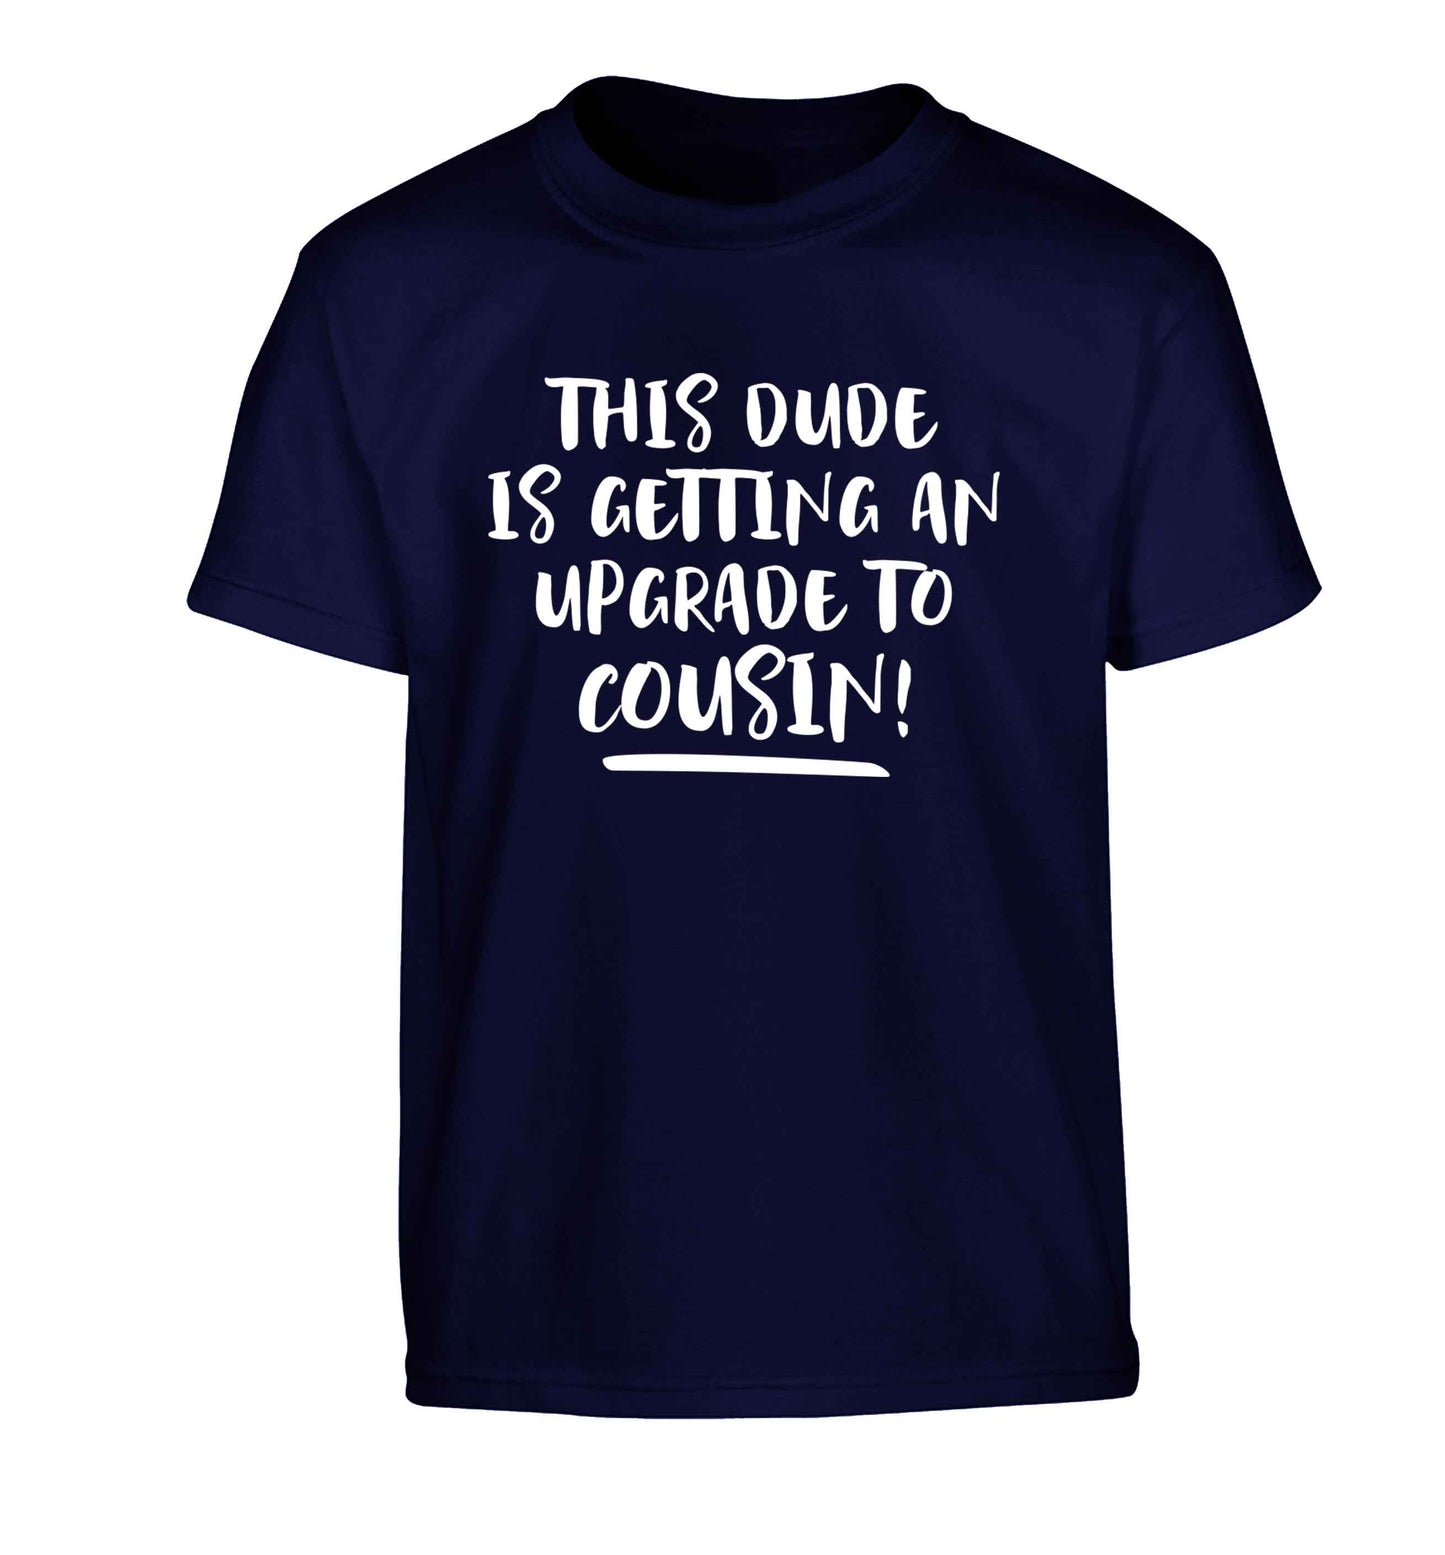 This dude is getting an upgrade to cousin! Children's navy Tshirt 12-13 Years